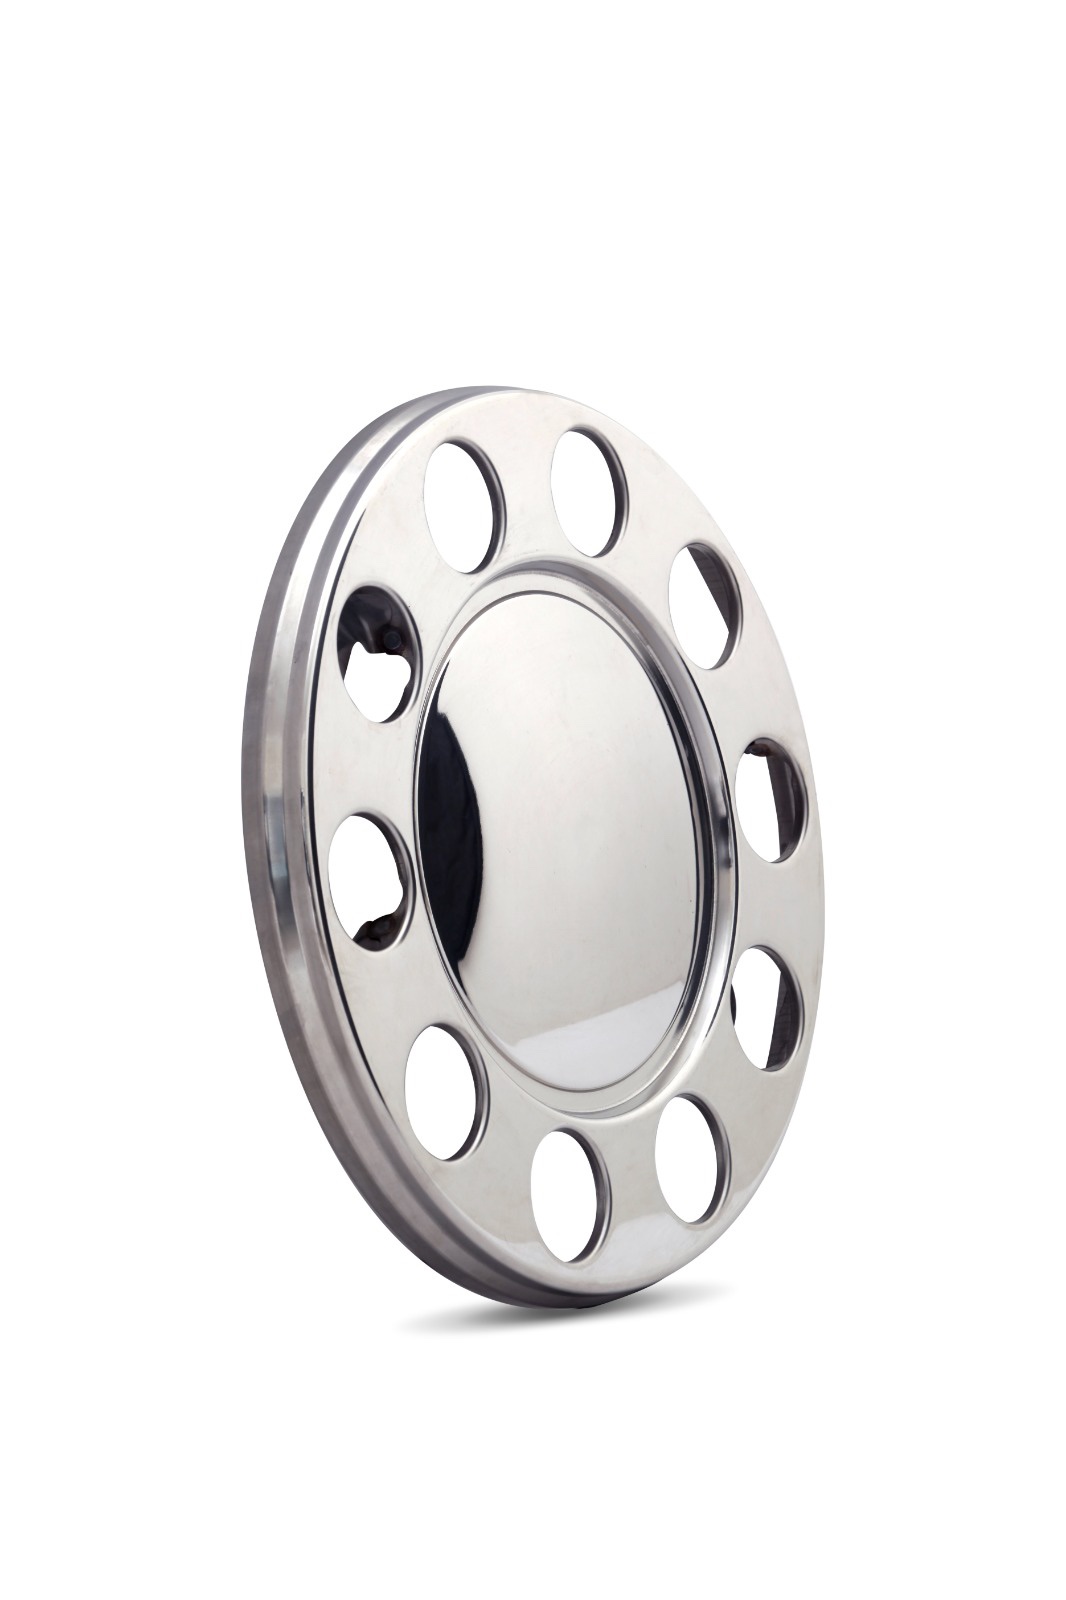 22,5 Stainless Steel Wheel Covers  (10 STUDS) (HOLLOW),Code: C1010/6